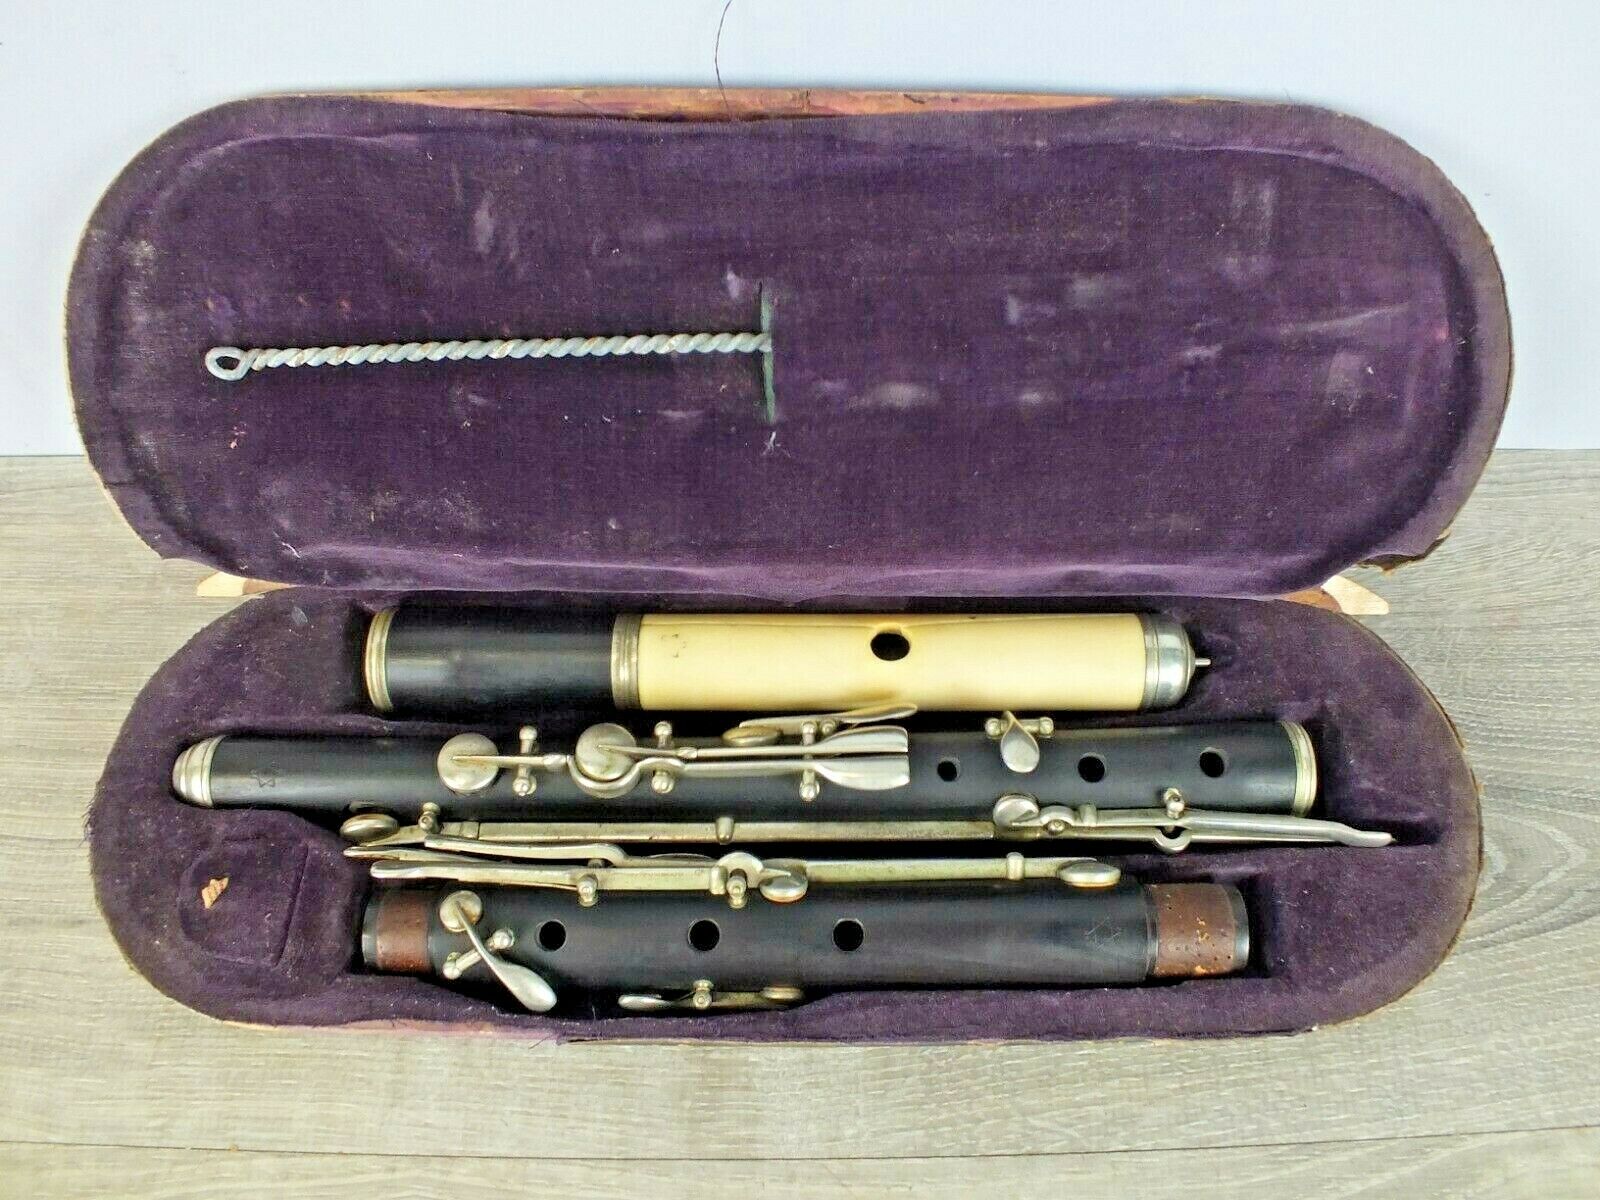 1800s Rare Antique Flute W Makers Mark And Original Case To Restore Or Display